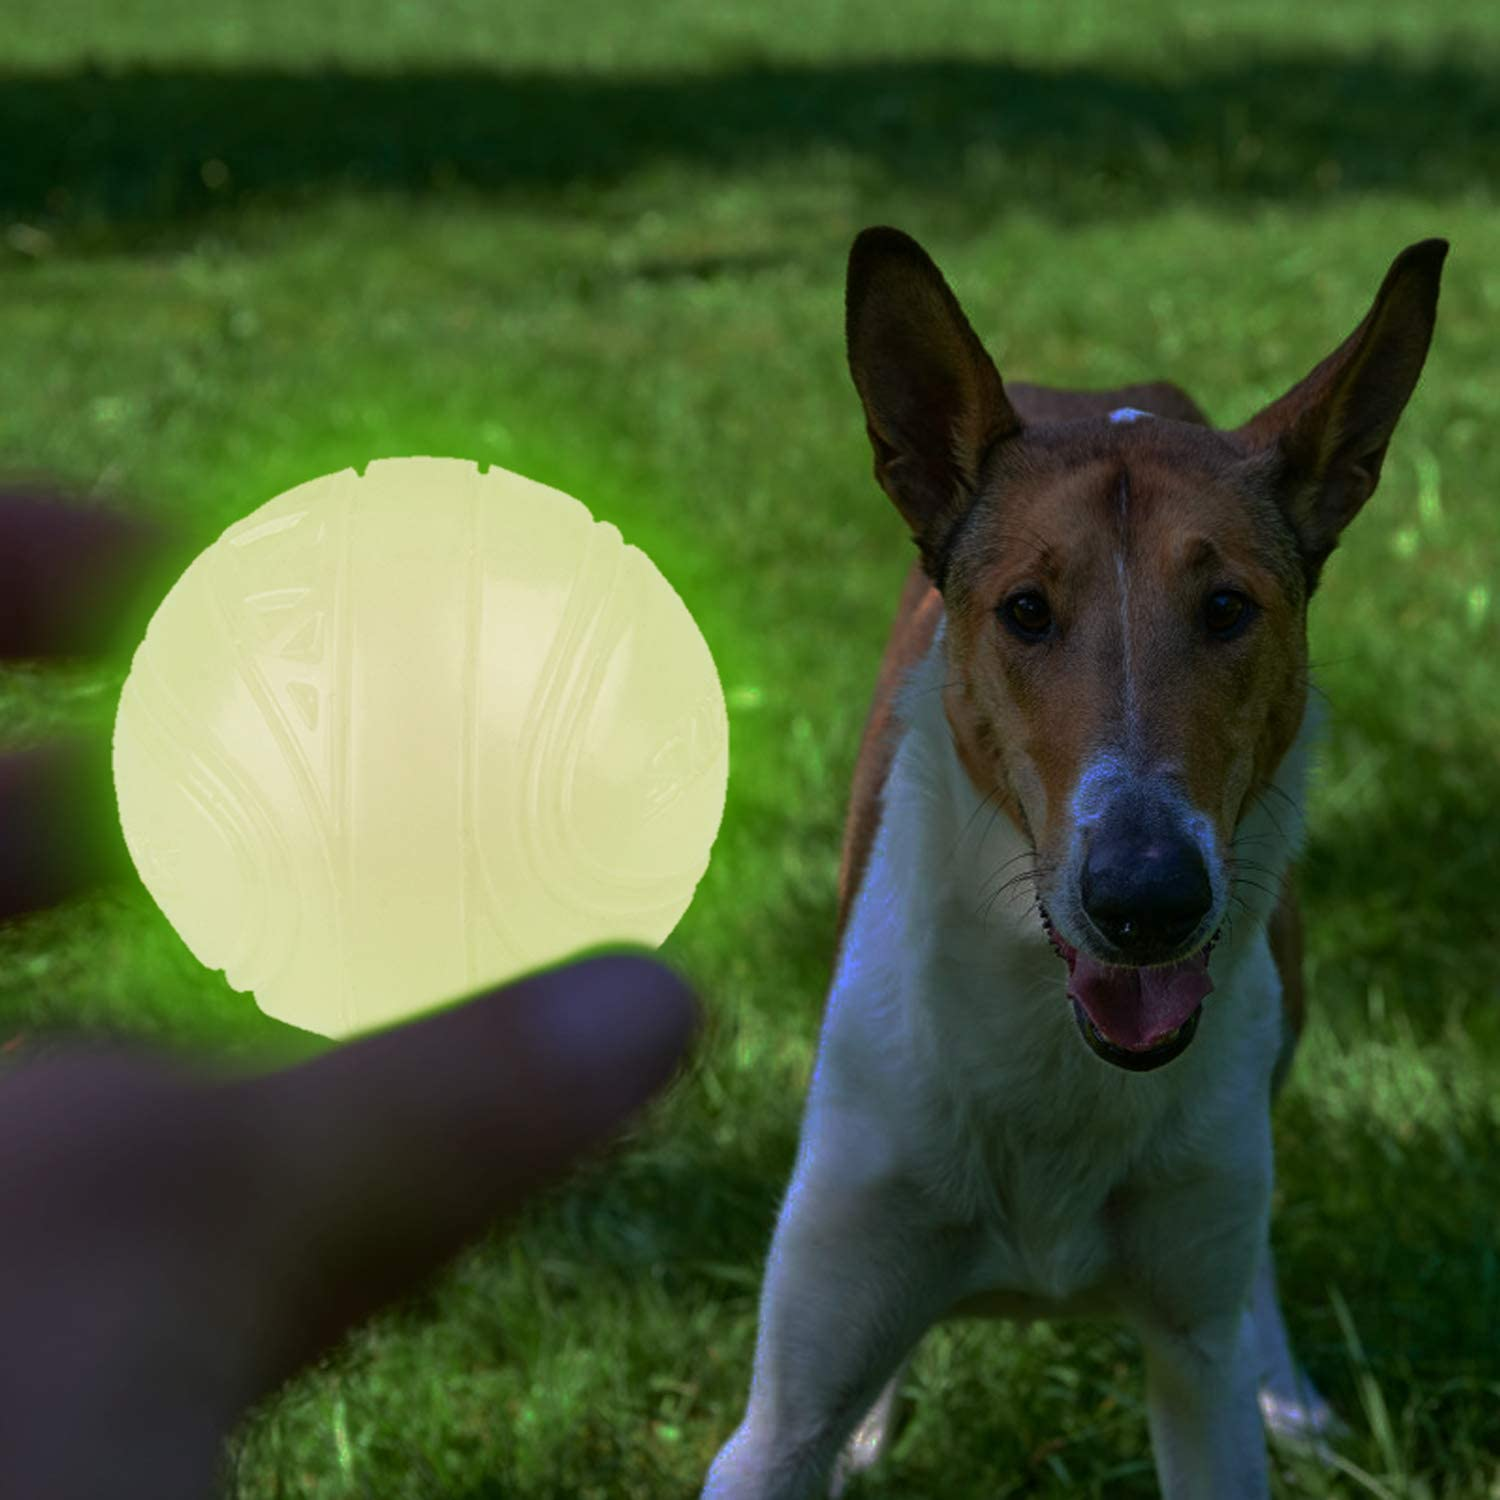 Dog waiting for glow-in-the-dark ball to be thrown